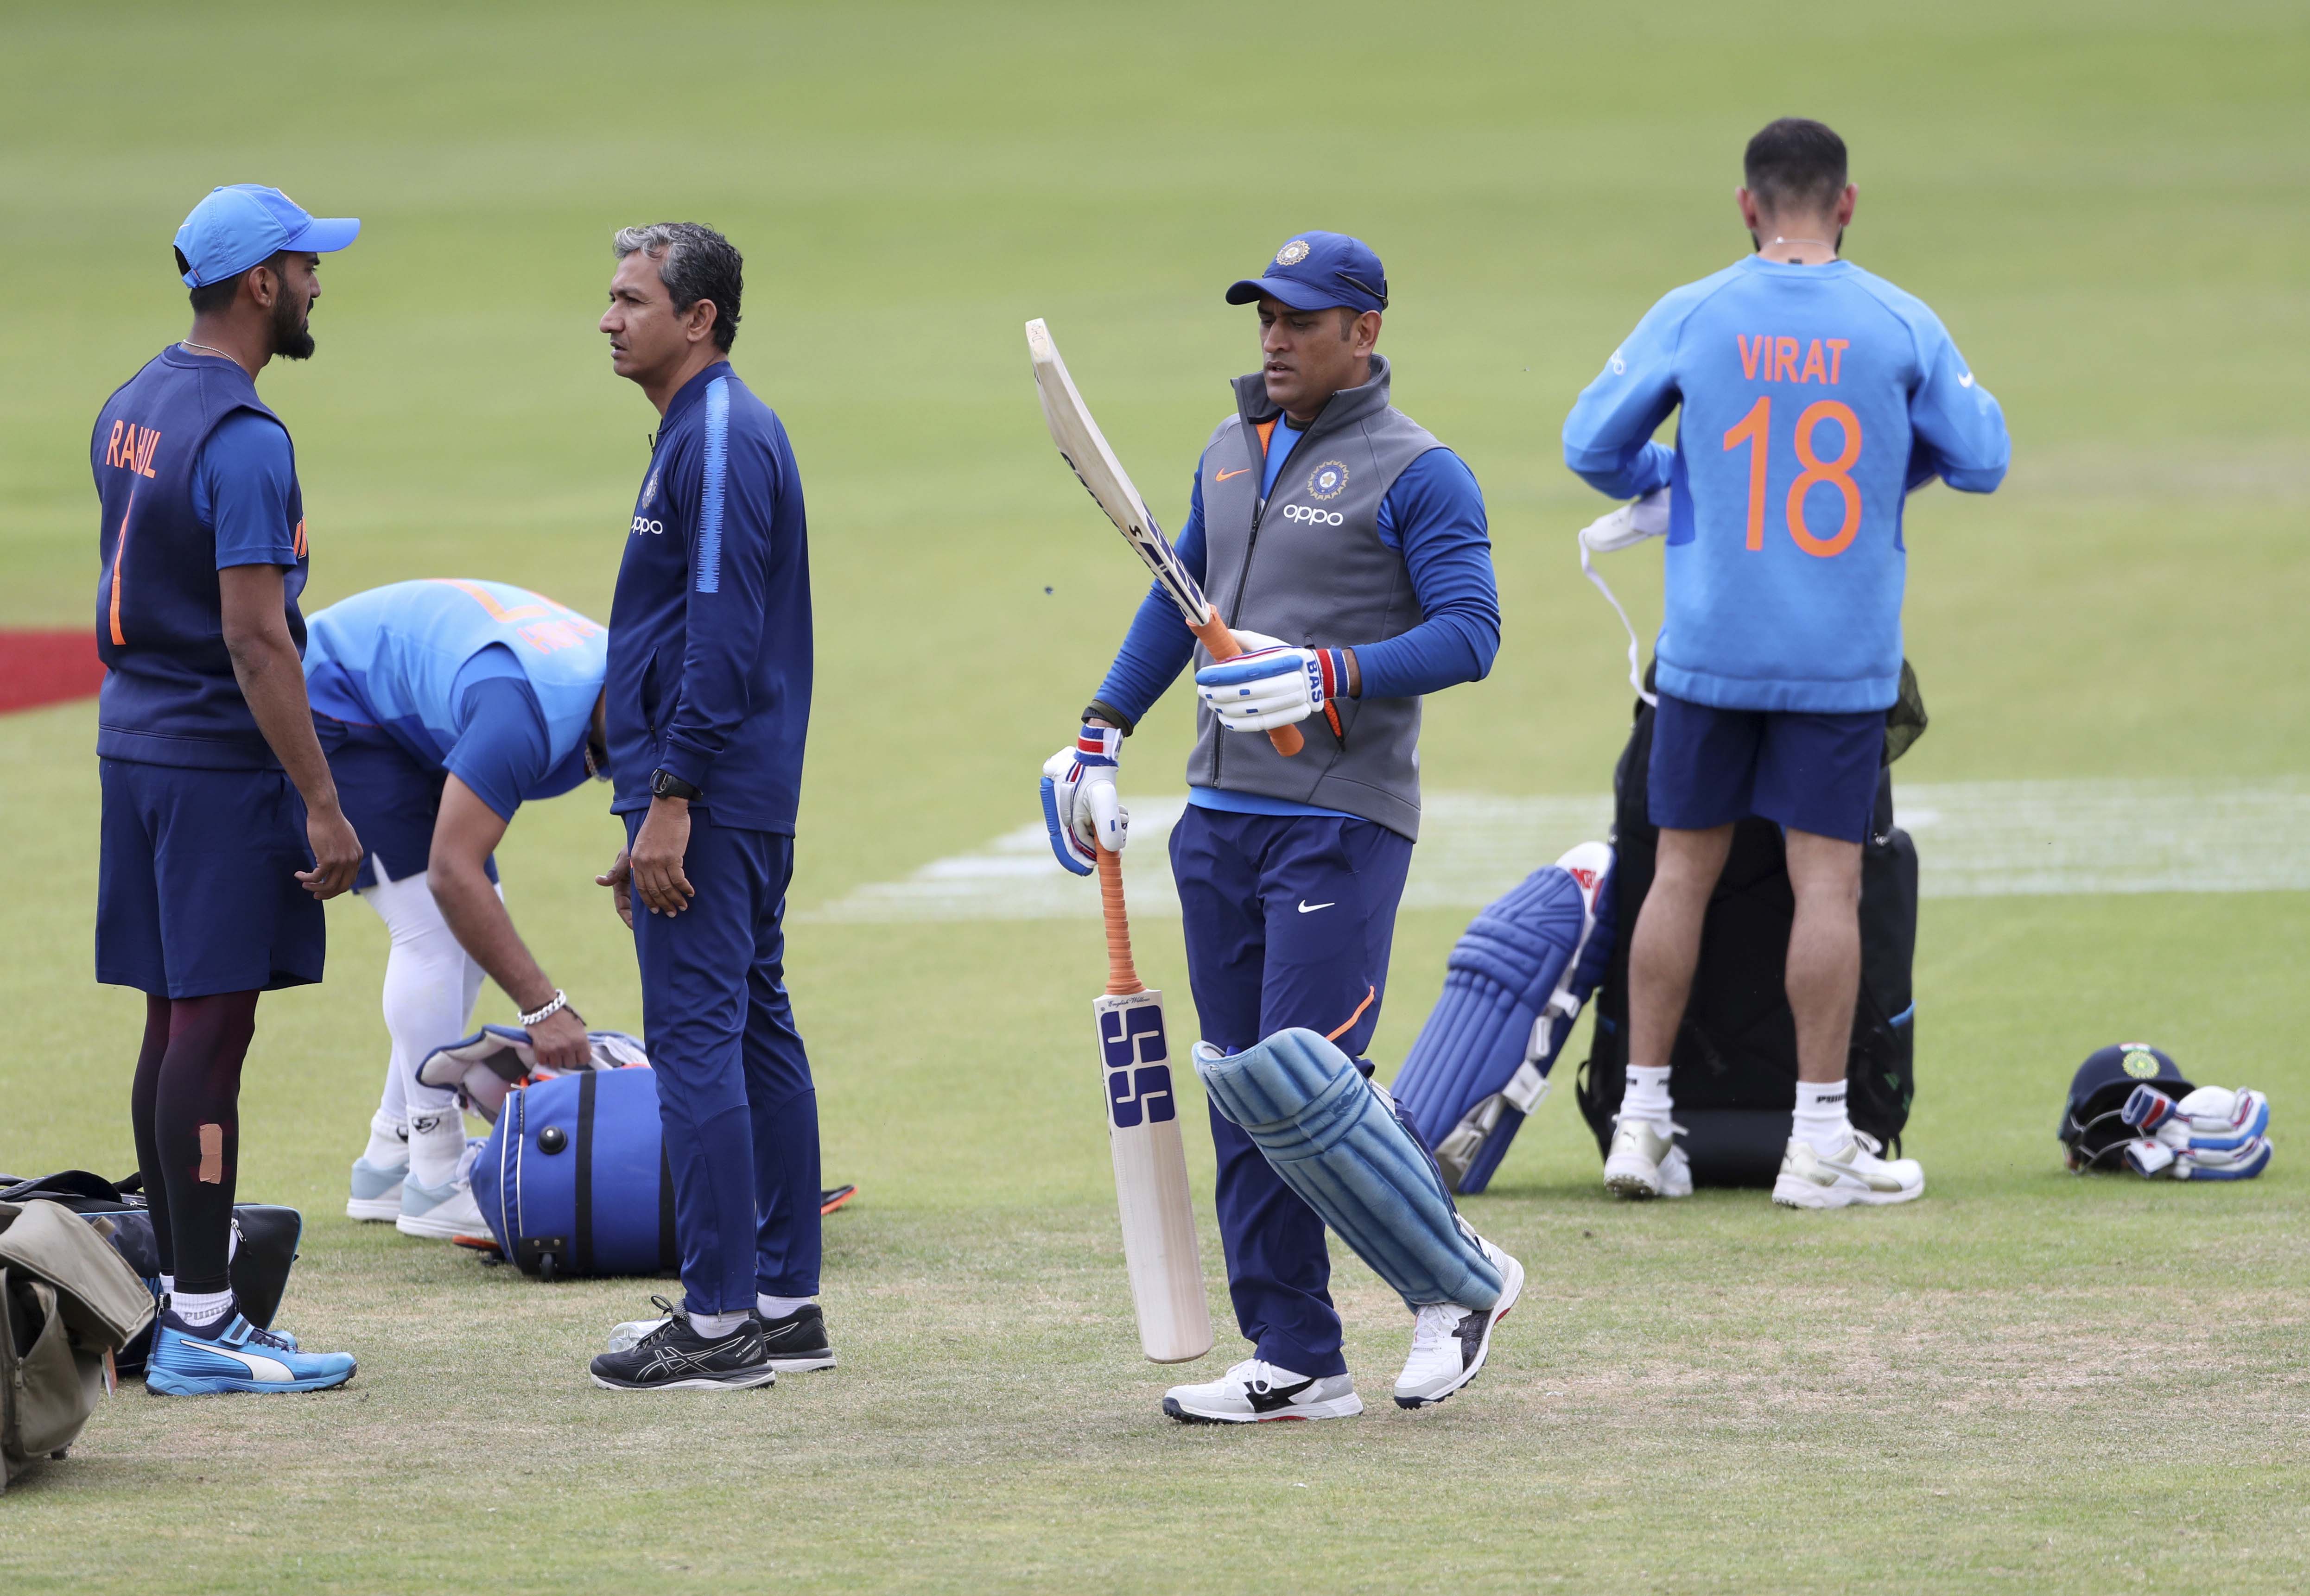 India's MS Dhoni, second right, carries his bats before batting in the nets during a training session ahead of their Cricket World Cup match against Sri Lanka at Headingley in Leeds, England - PTI